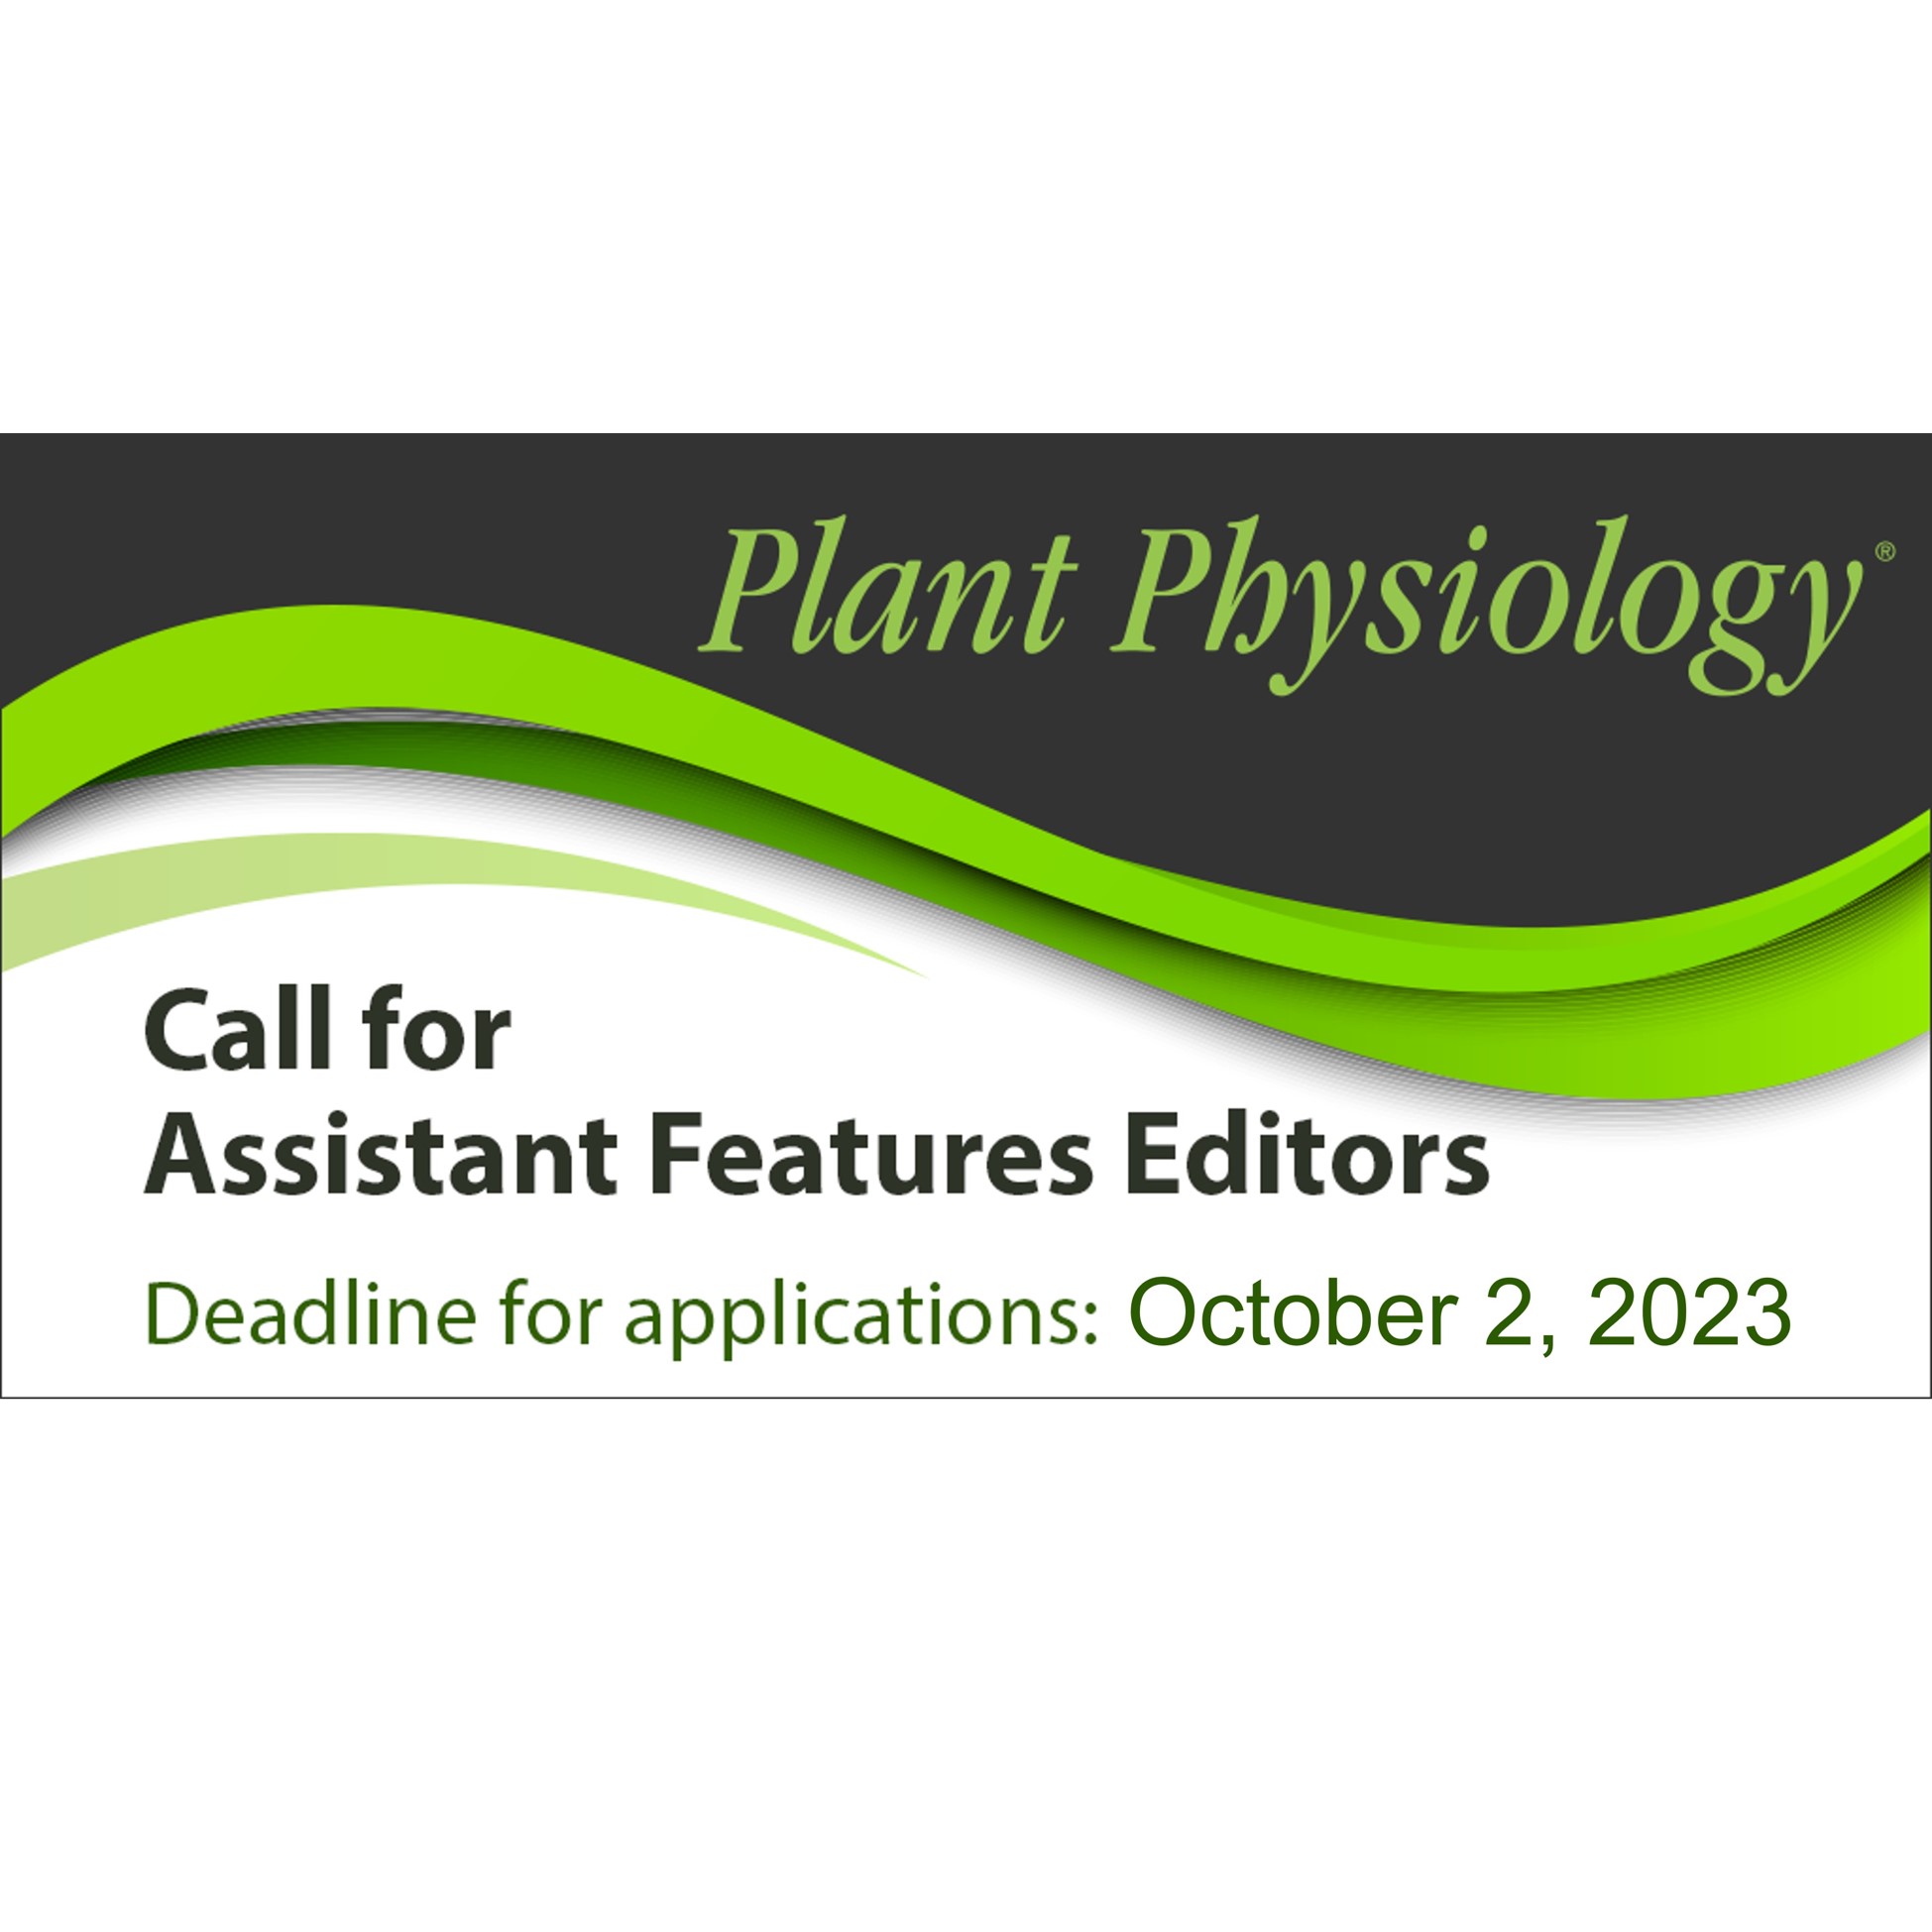 Plantae Plant Physiology is recruiting Assistant Features Editors for